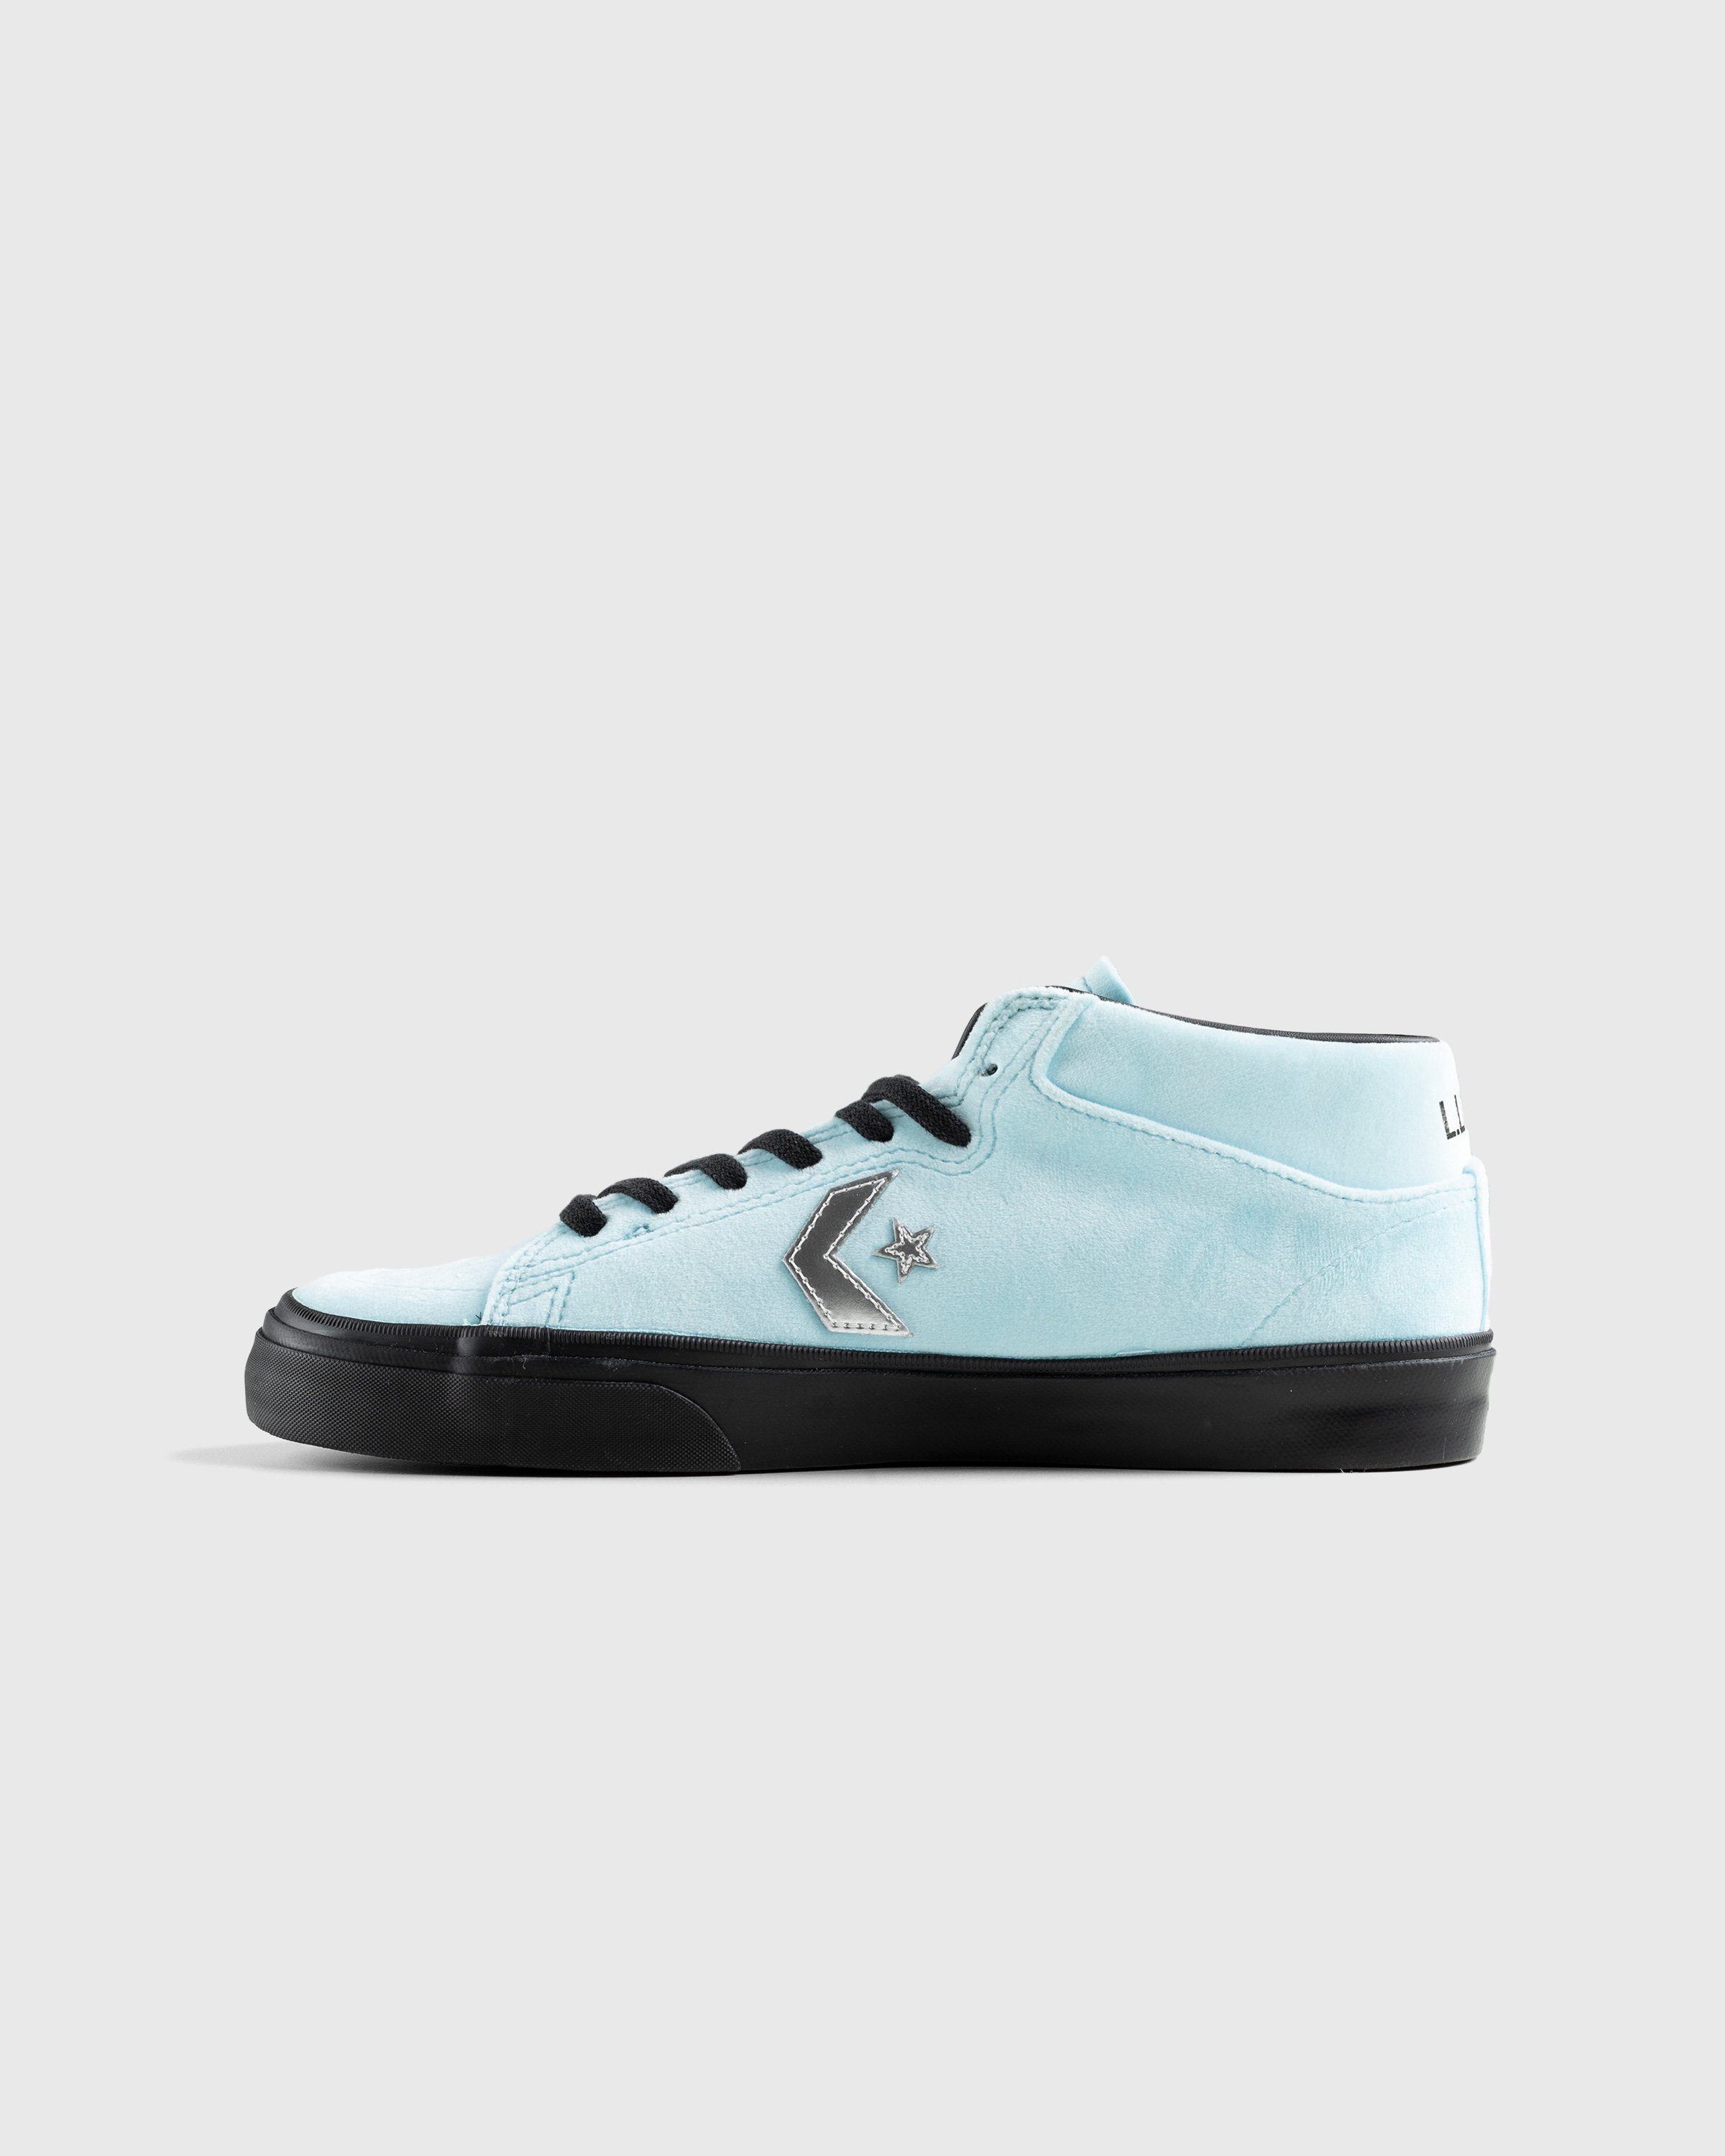 Converse x Fucking Awesome - Louie Lopez Pro Mid Cyan Tint/Black - Footwear - Blue - Image 2